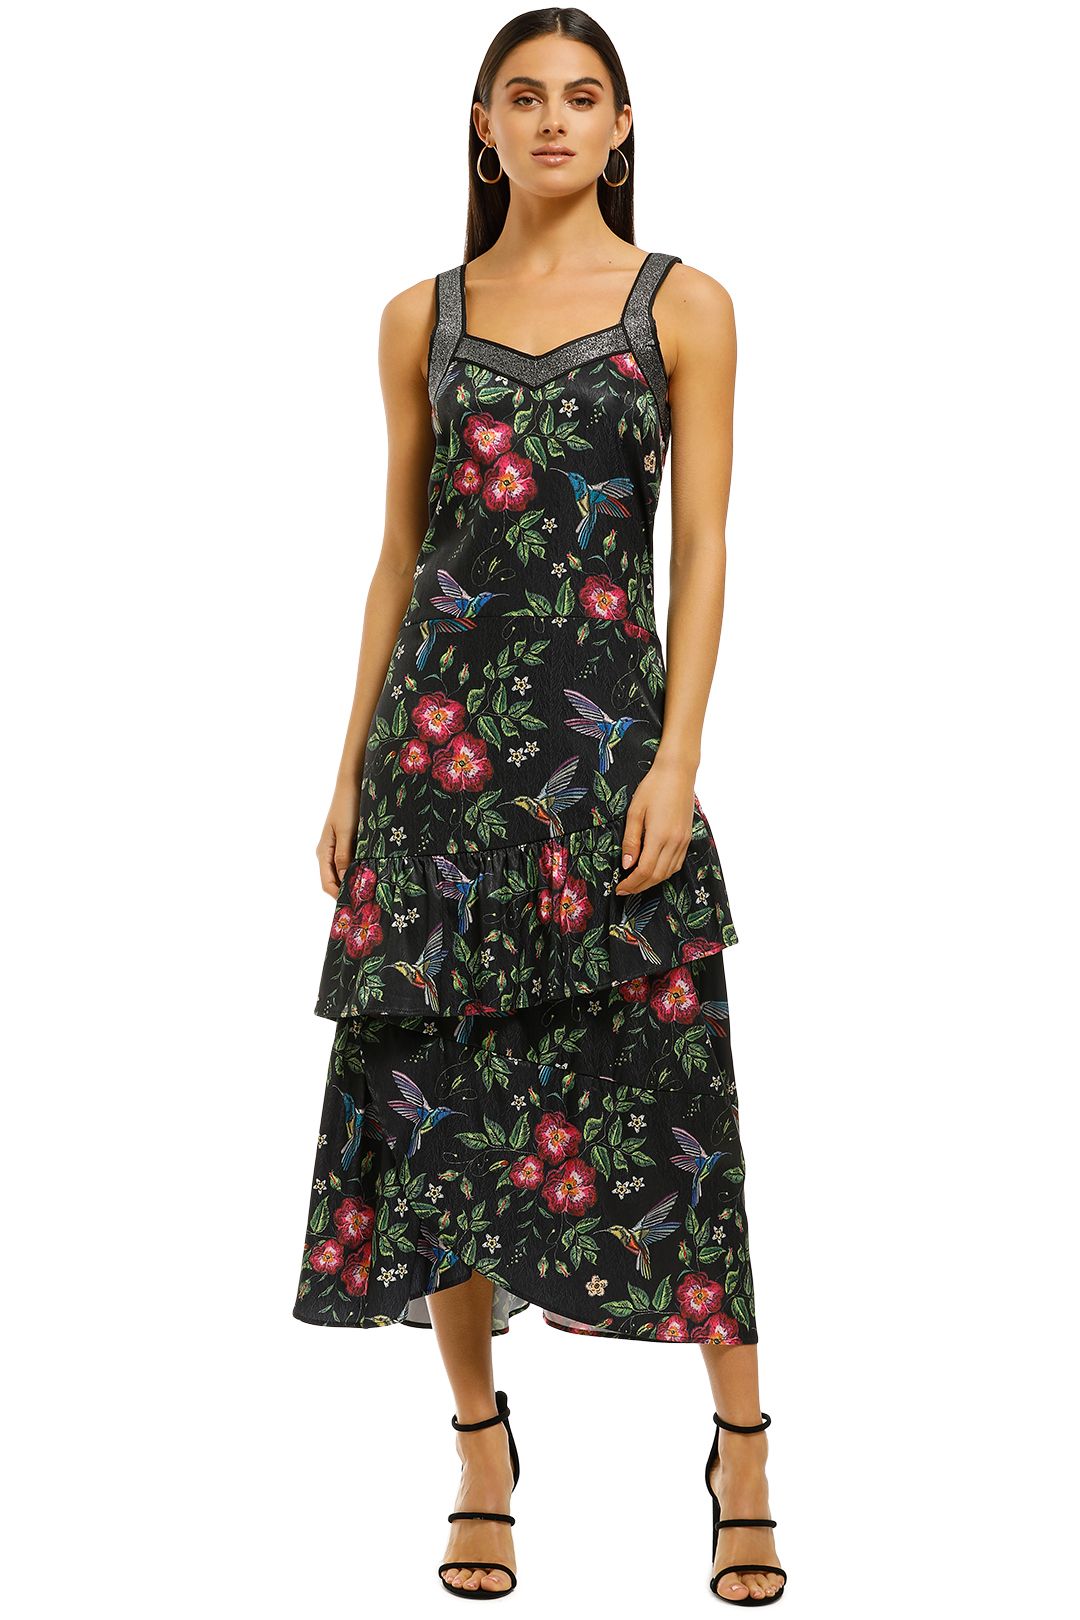 Curate-by-Trelise-Cooper-Ruffle-Feathers-Dress-Black-Floral-Front